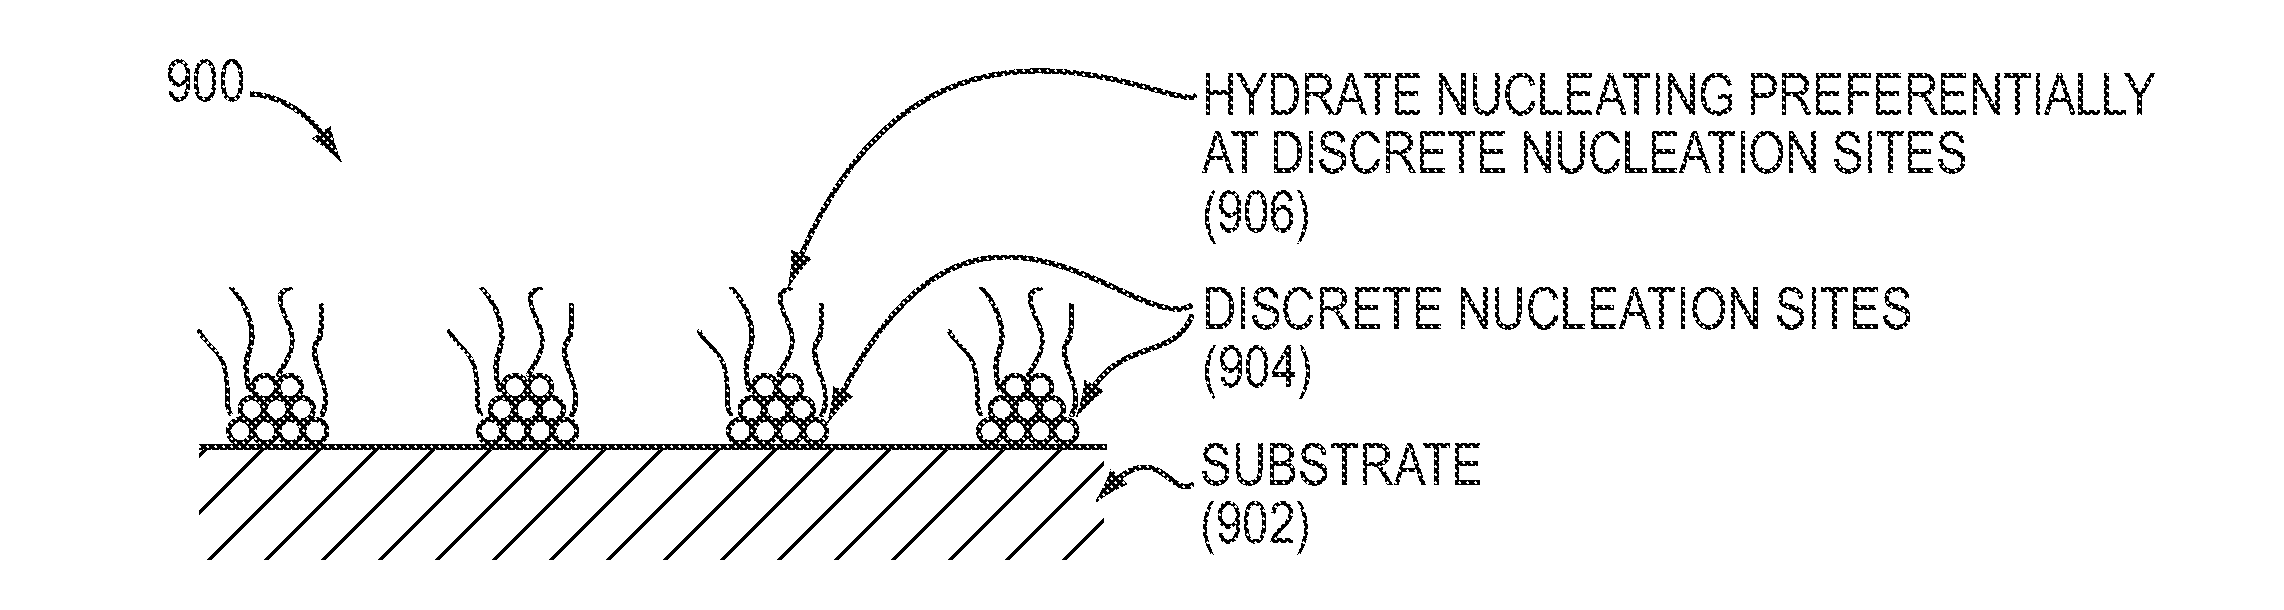 Articles and methods for reducing hydrate adhesion